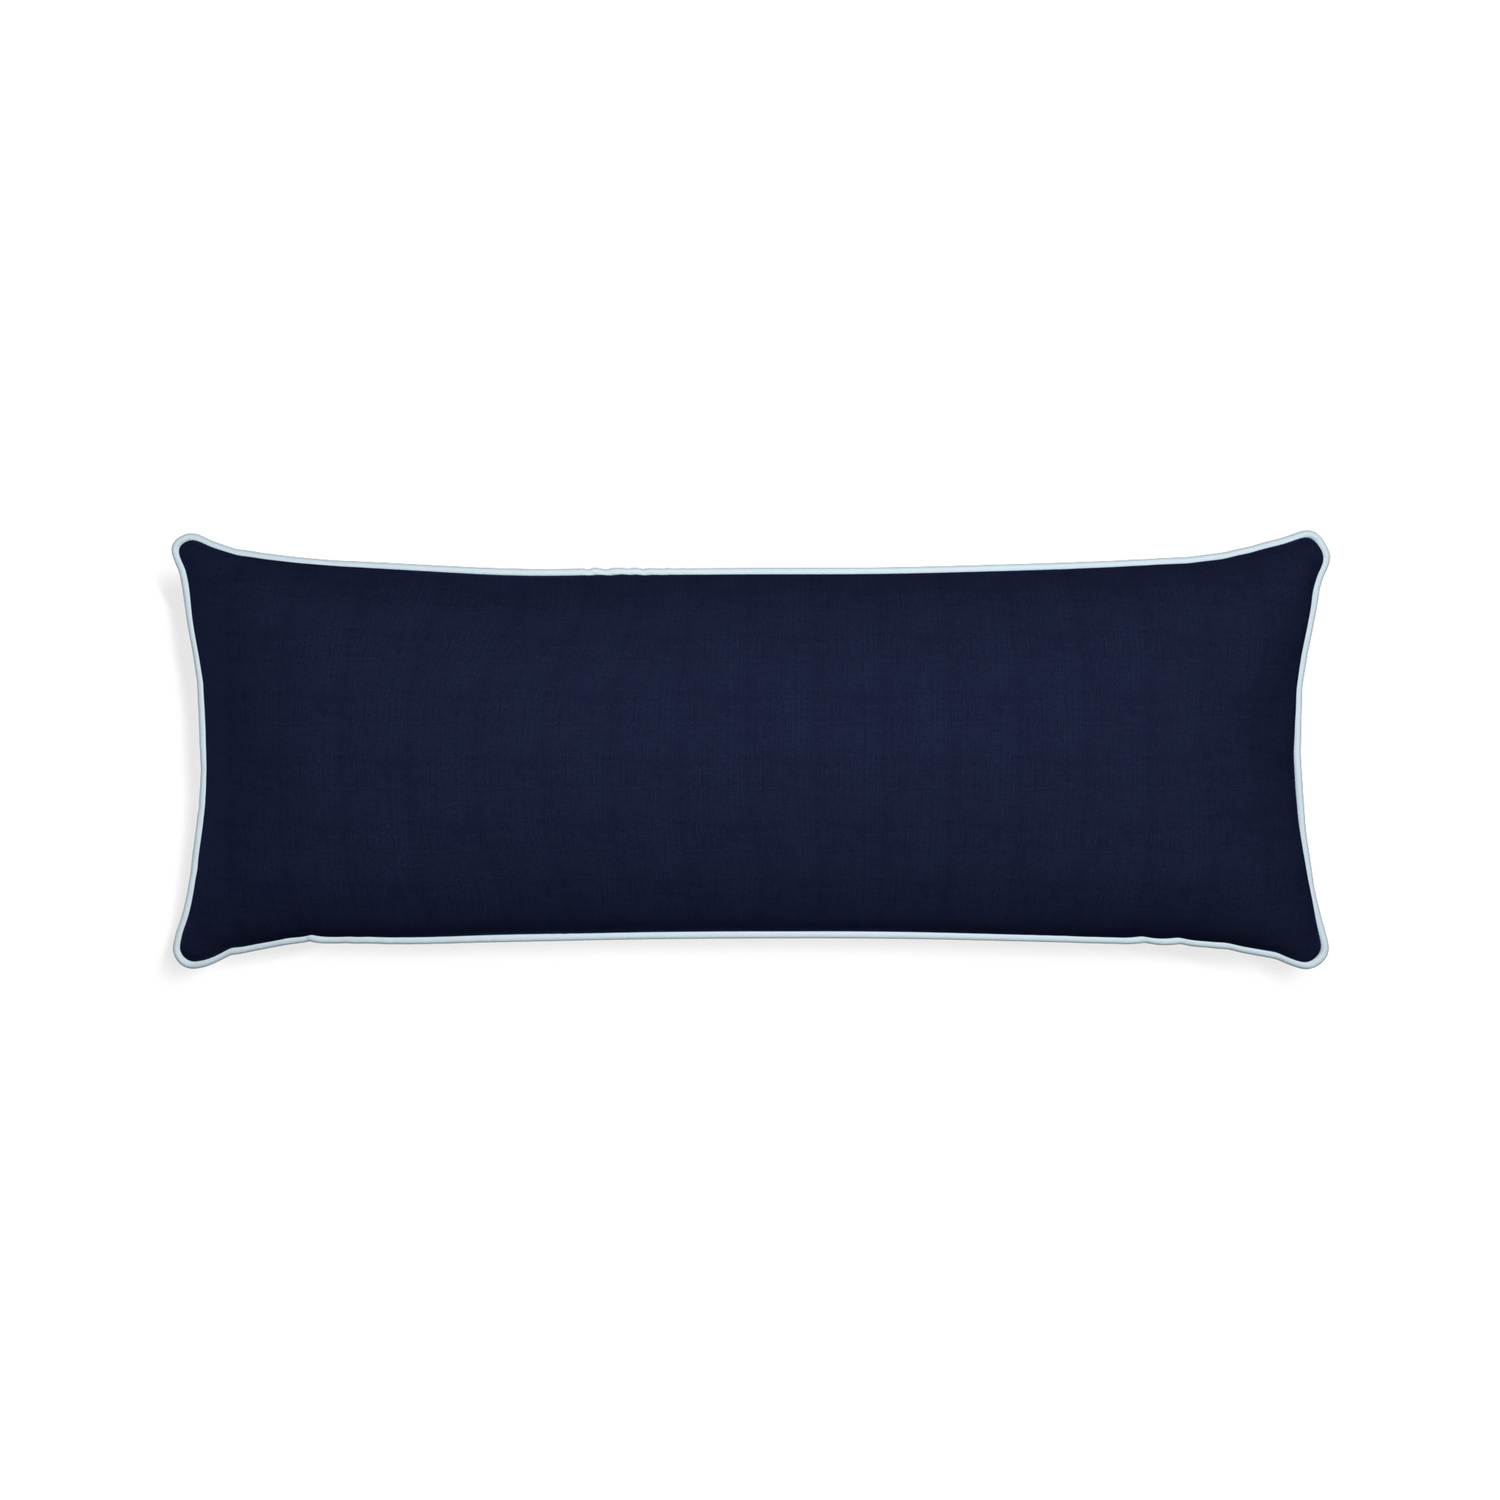 Xl-lumbar midnight custom pillow with powder piping on white background